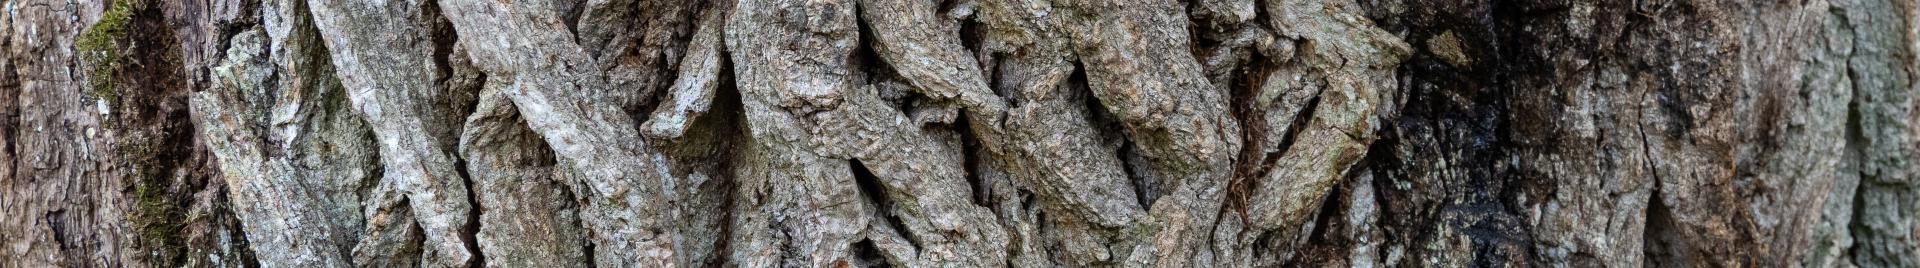 a picture of a barked tree